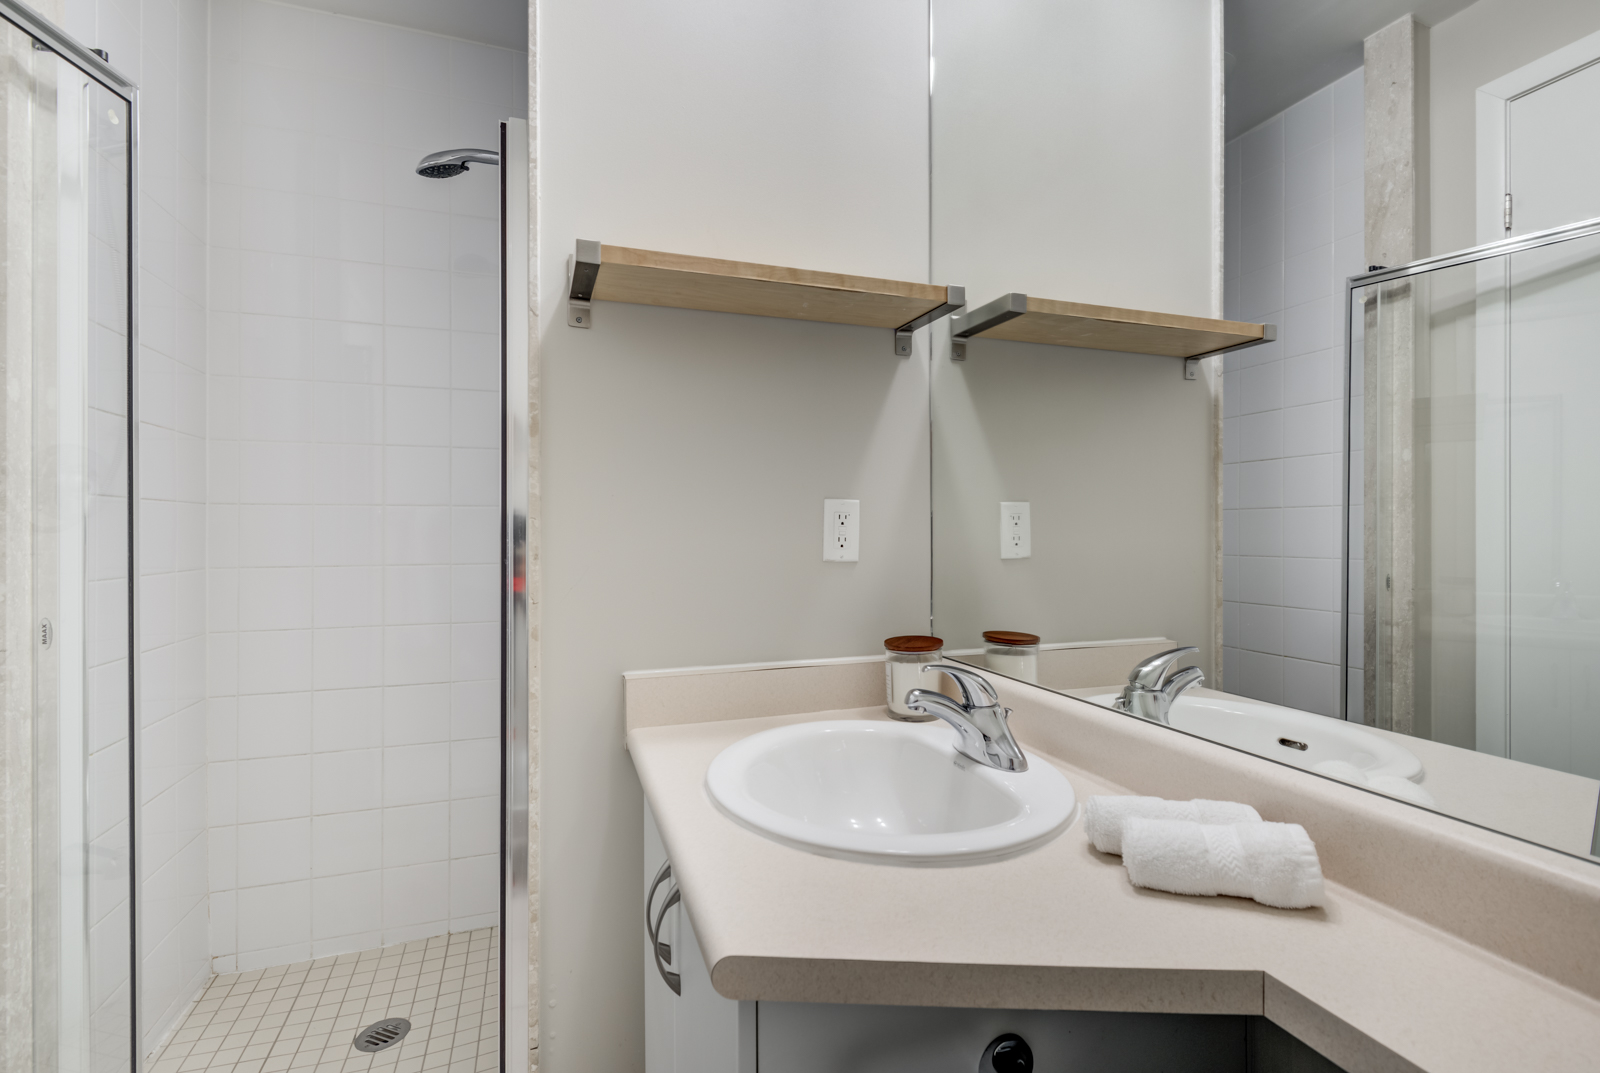 Small bathroom with oval sink, silver faucet, wooden shelf, walk-in shower and large mirror.